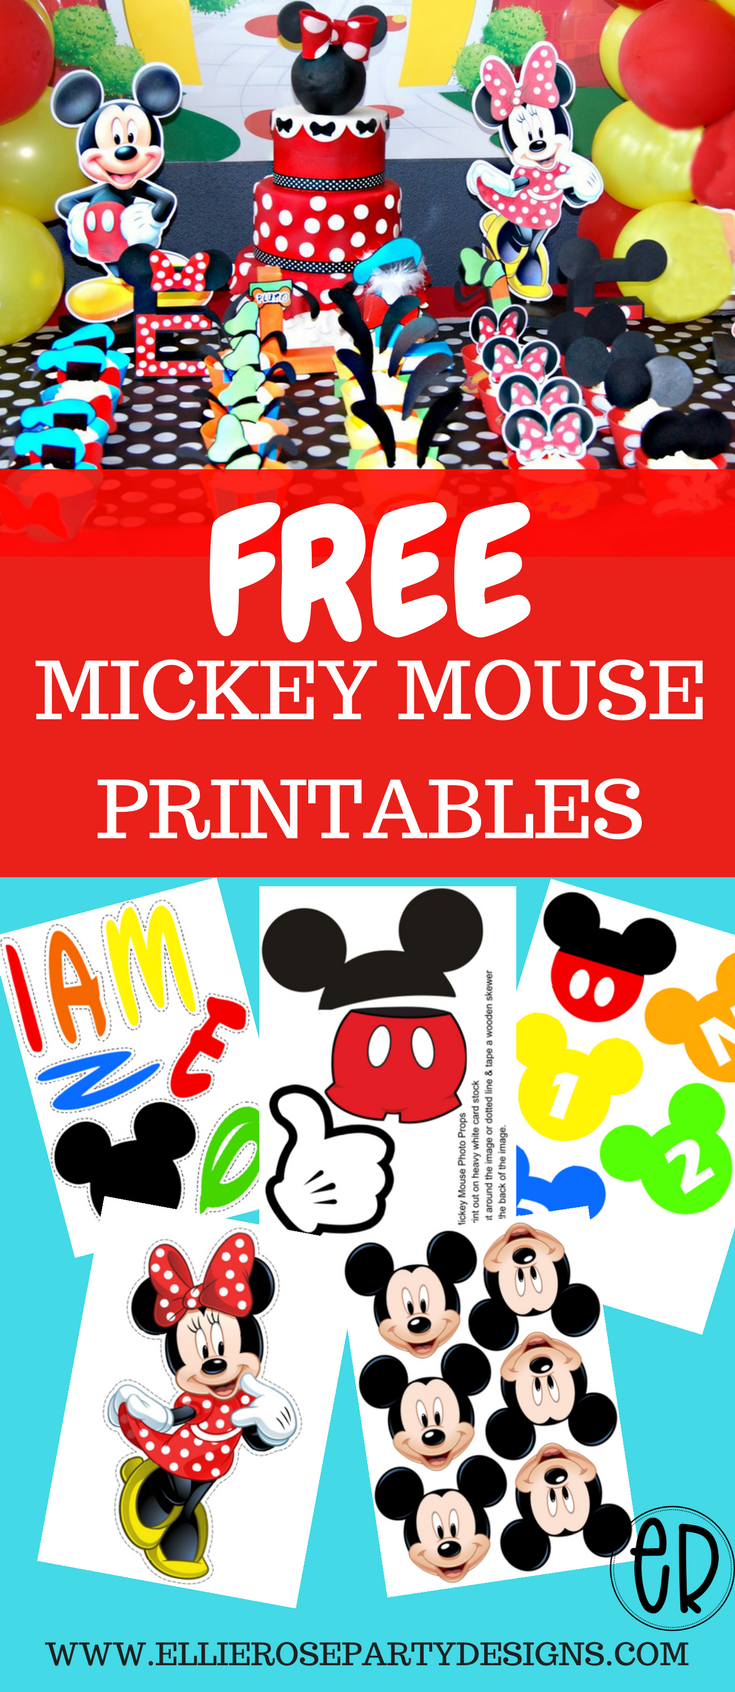 How To Plan A Mickey Mouse Birthday Party Celebration For Under throughout Free Printable Mickey Mouse Decorations